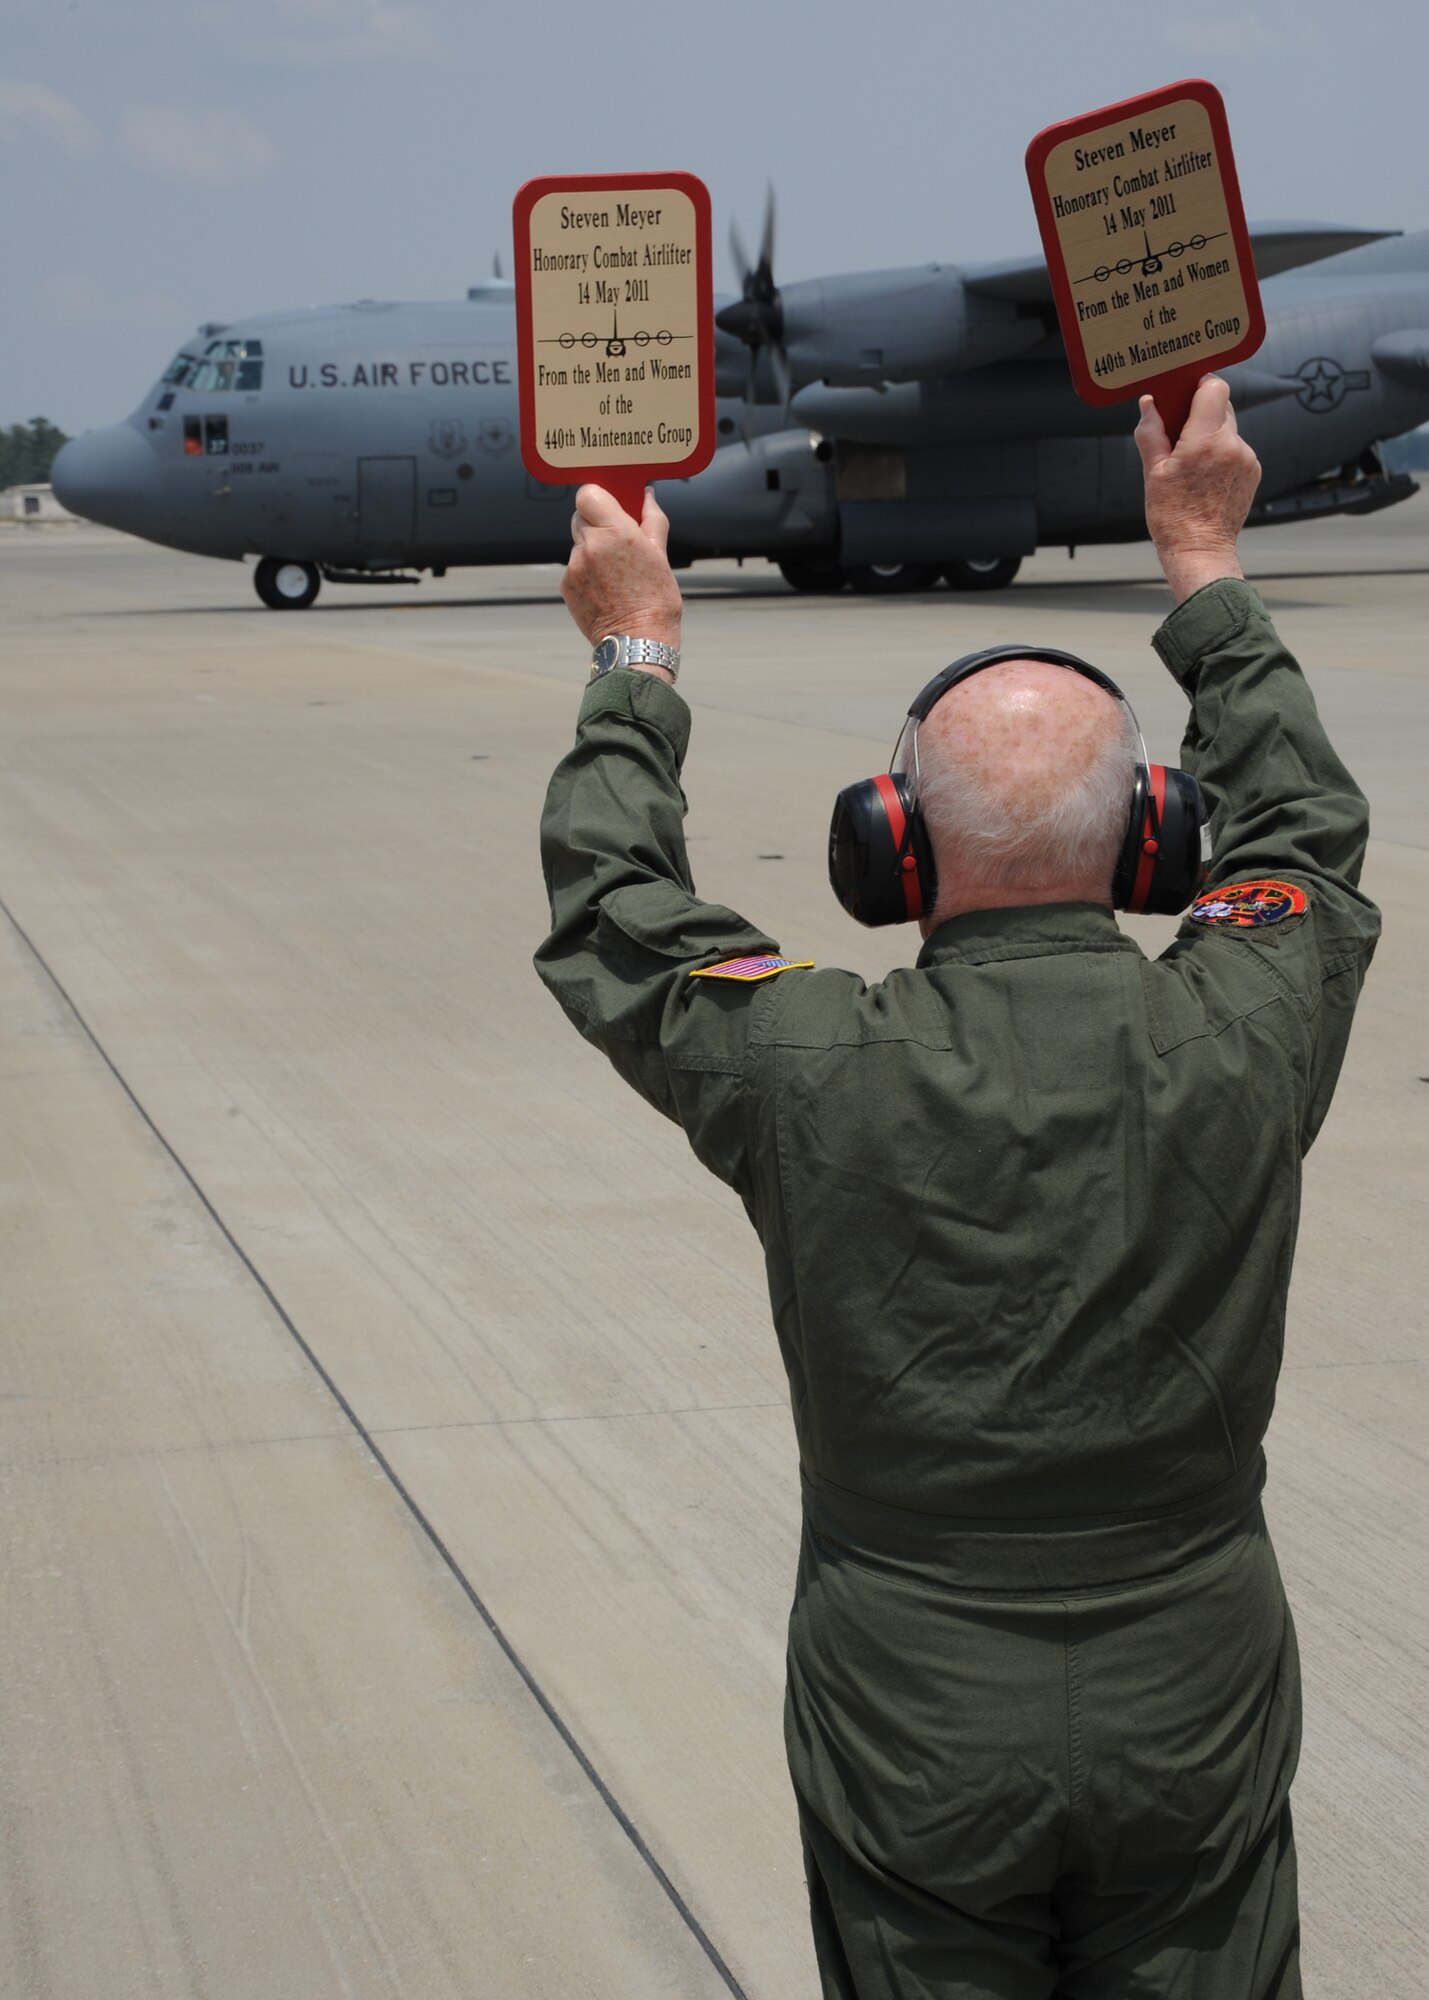 World War II veteran, Mr. Steven Meyer holds up his marshalling paddles to direct a 440th Airlift Wing C-130 aircraft into position on the Pope Field flightline.  Mr. Meyer celebrated his 89th birthday by having his “wish of a lifetime” fulfilled May 13, 2011. His wish was to stand out on a flightline and guide an aircraft into its parking spot. The event was a collaborative effort of the Heritage Raleigh Brookdale Senior Living retirement community in Raleigh, N.C., the Airmen of the 440th Airlift Wing and ‘Wish of a Lifetime,’ the foundation created by Olympic skater and former National Football League player Jeremy Bloom.   (U.S. Air Force photo by Staff Sgt. Peter R. Miller)